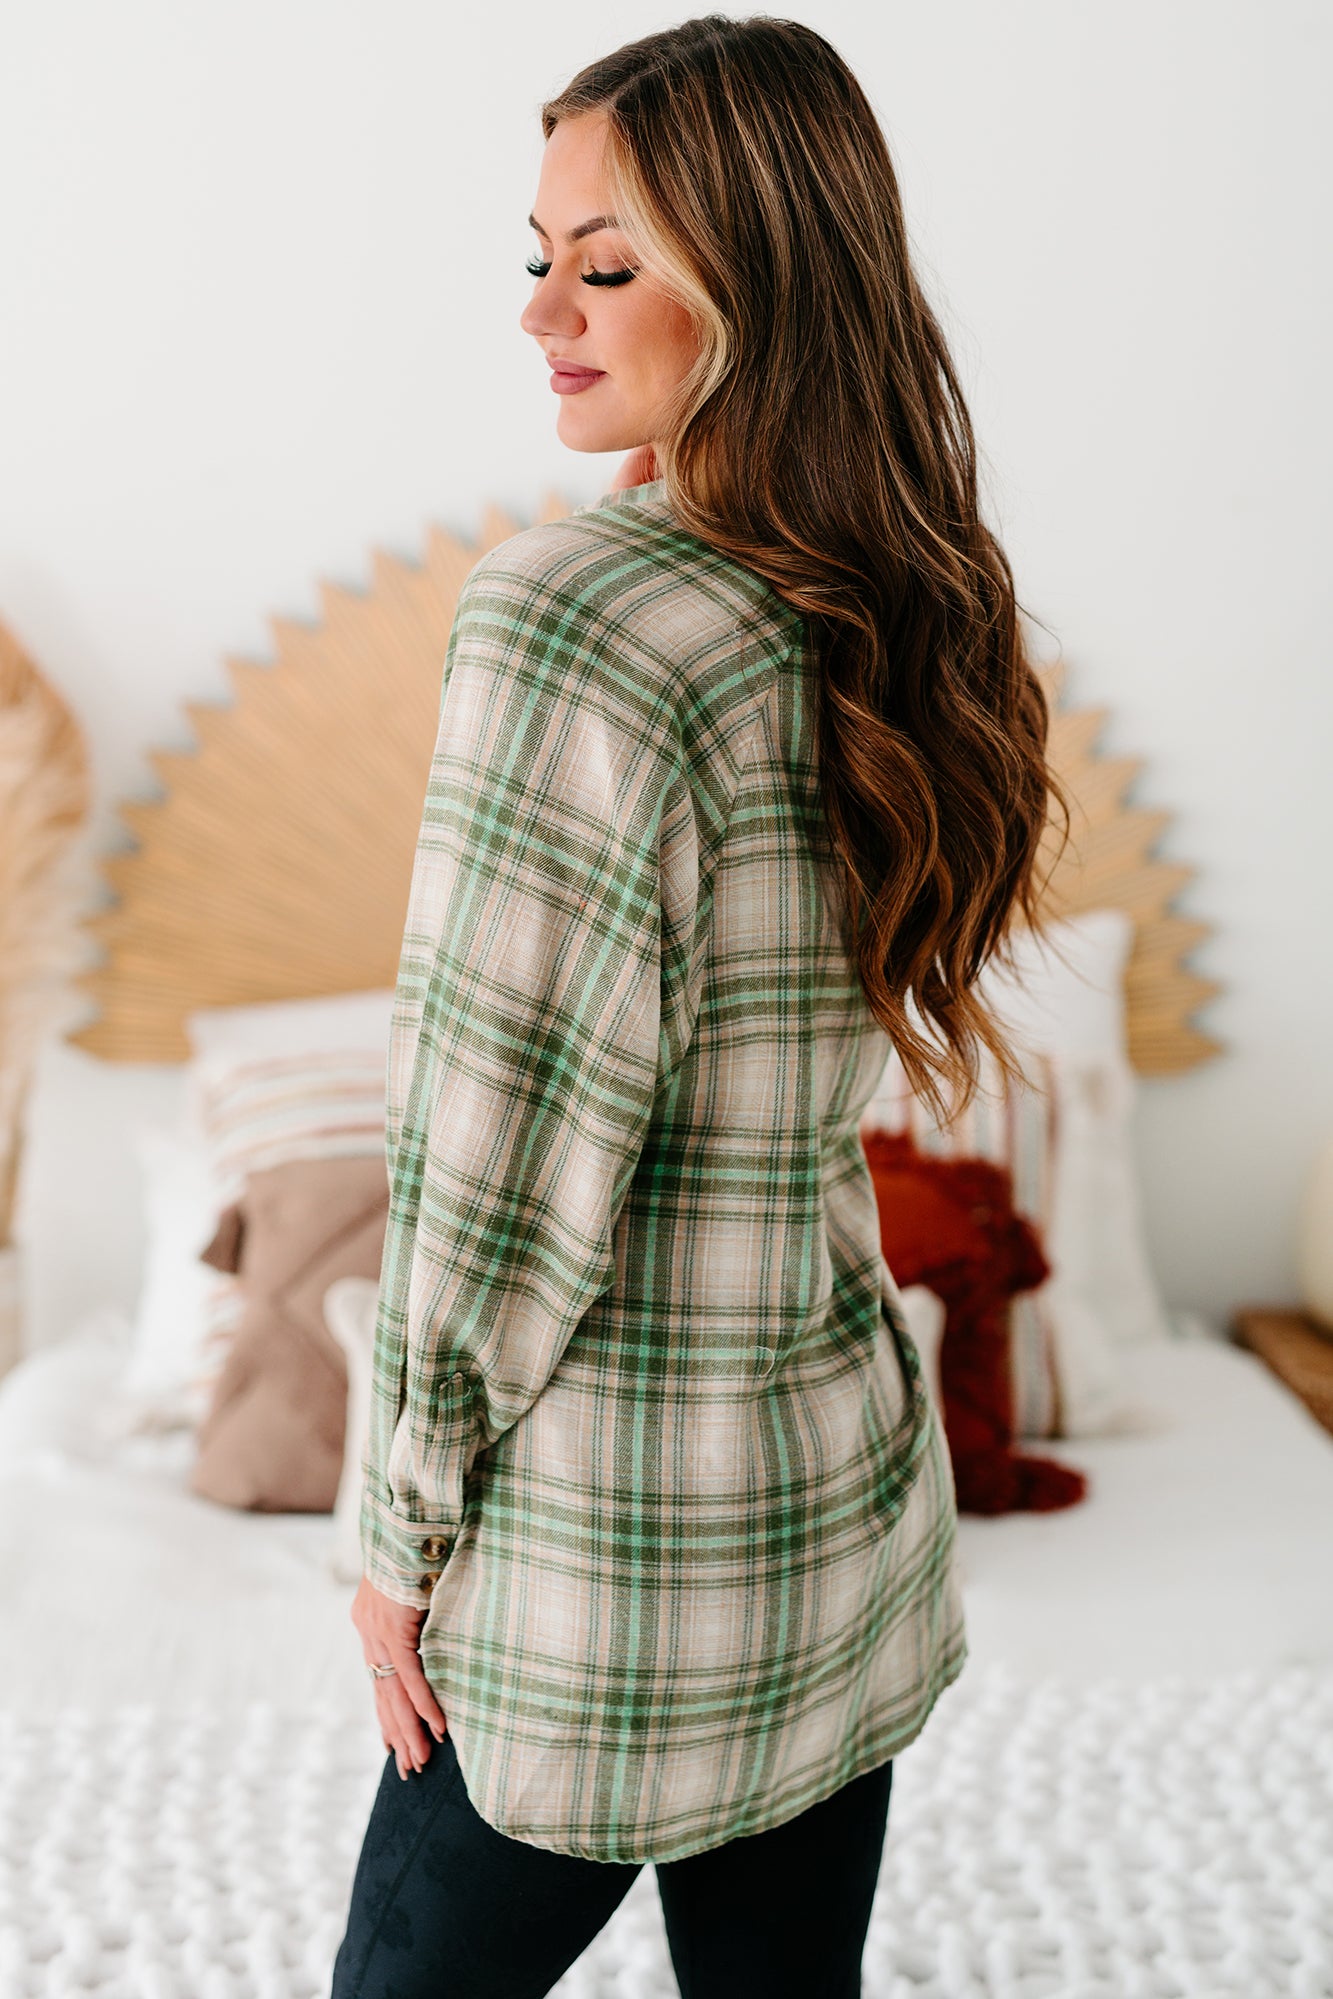 Mountain Tops High-Low Plaid Flannel Top (Olive Green) - NanaMacs